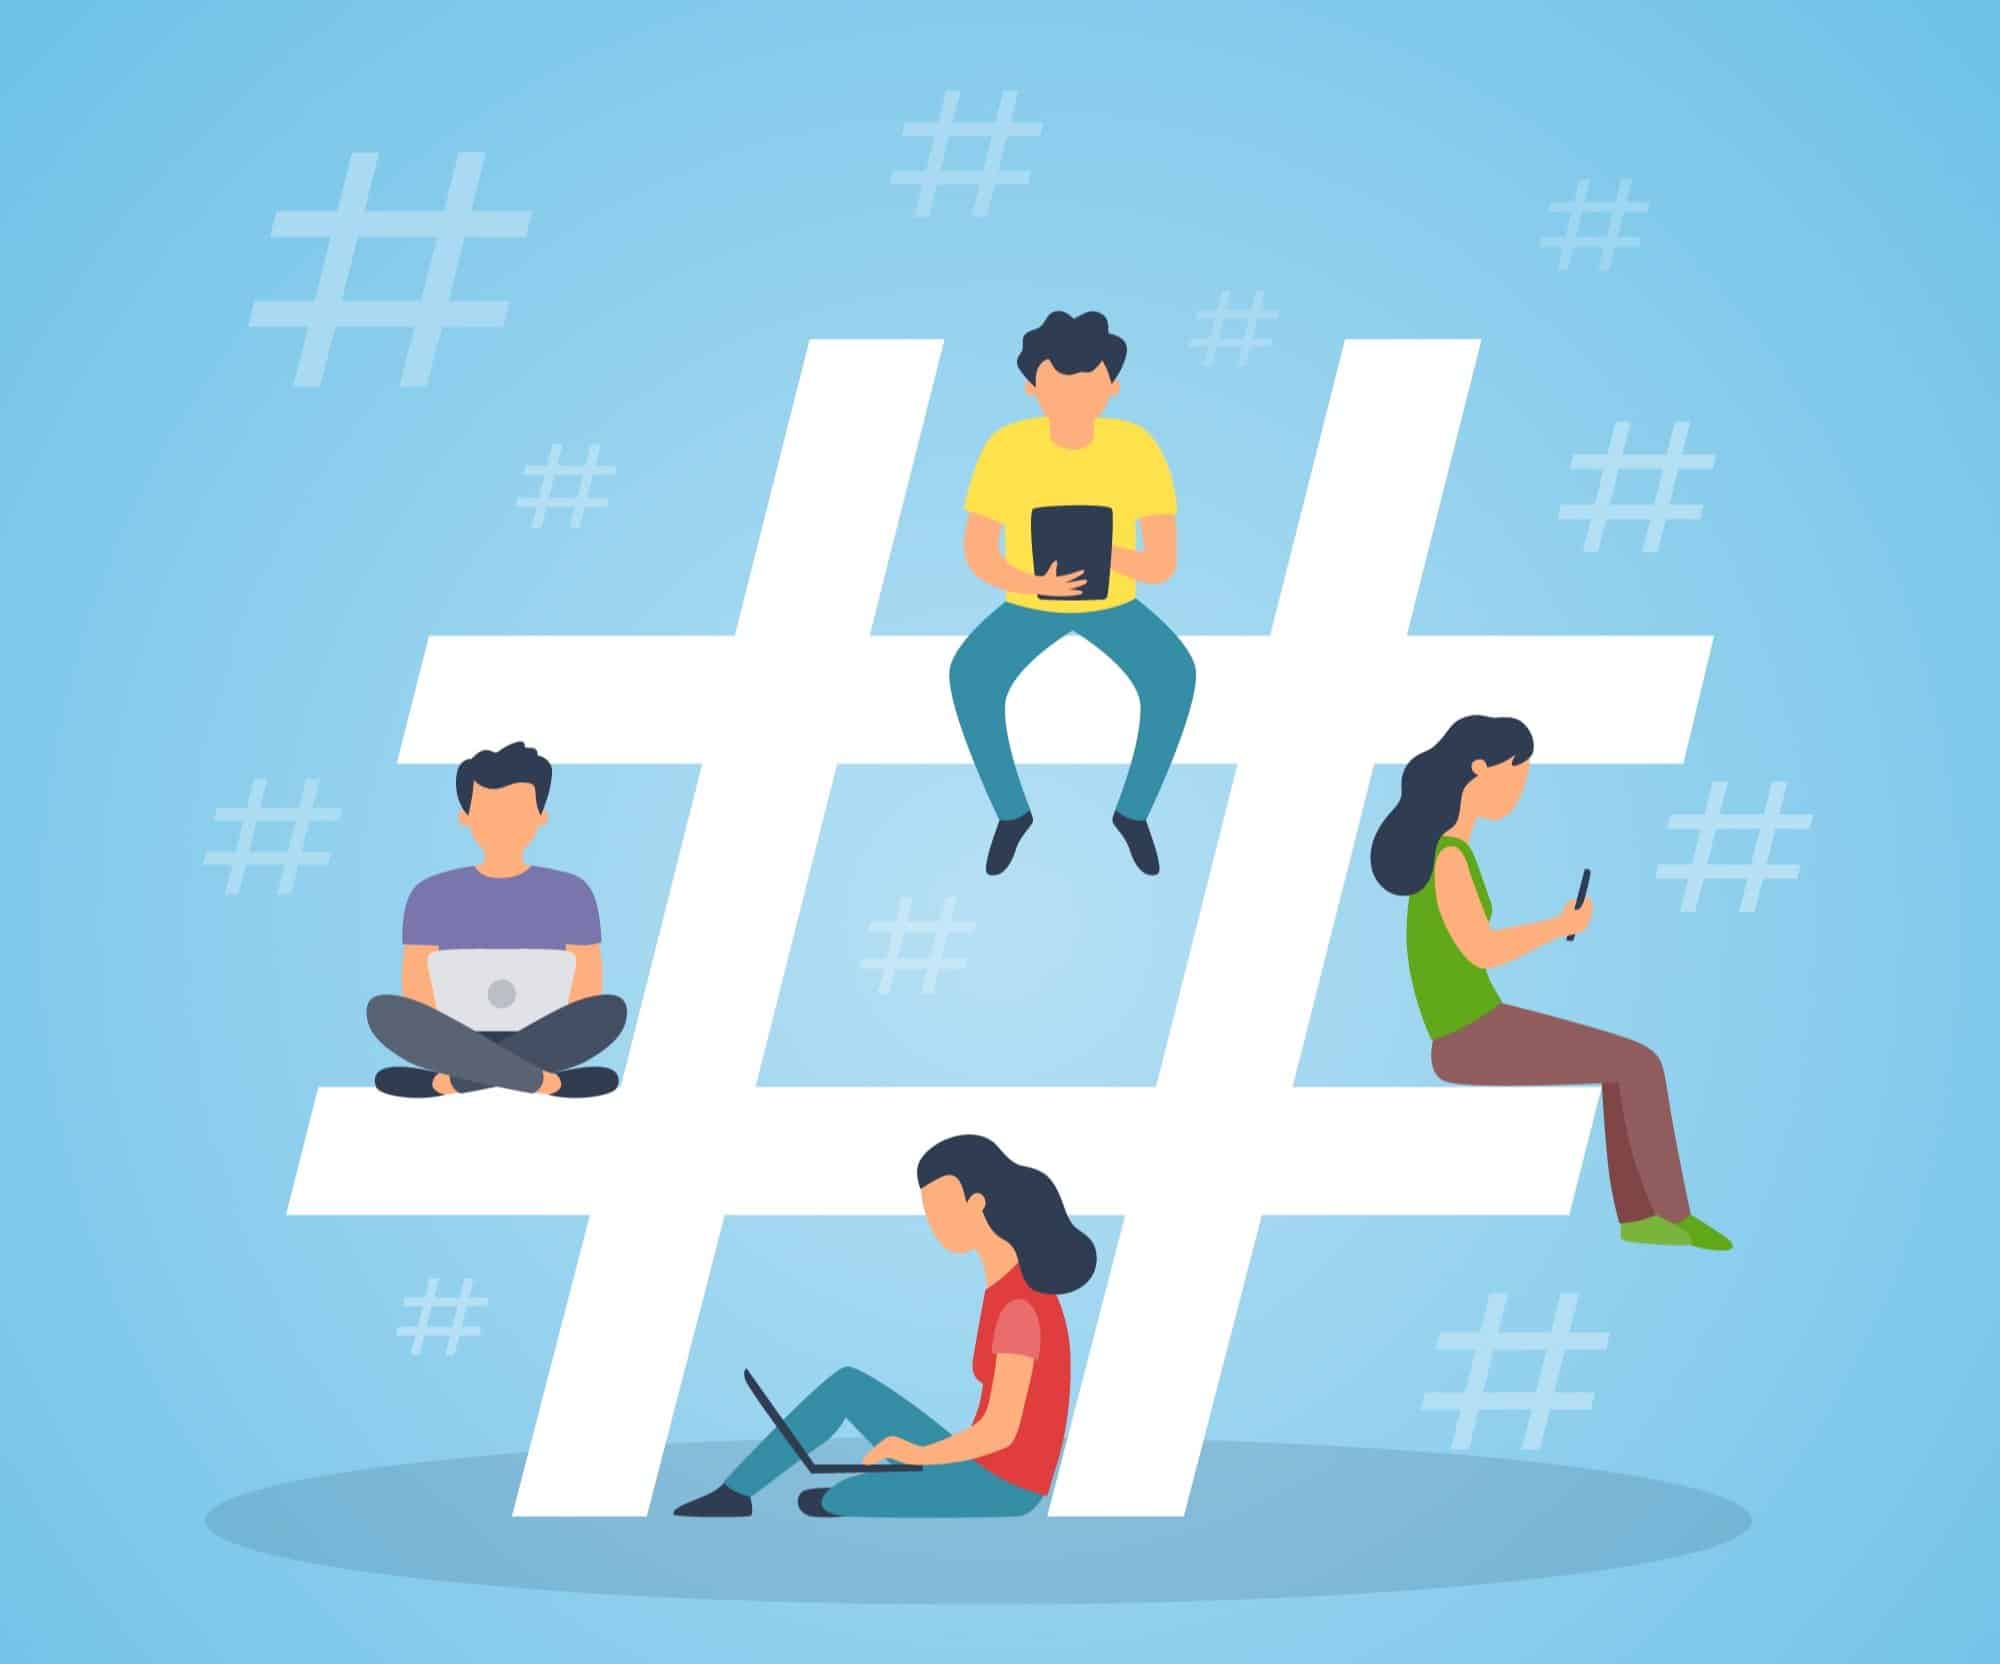 Digital abstract image of people sitting on a giant hashtag